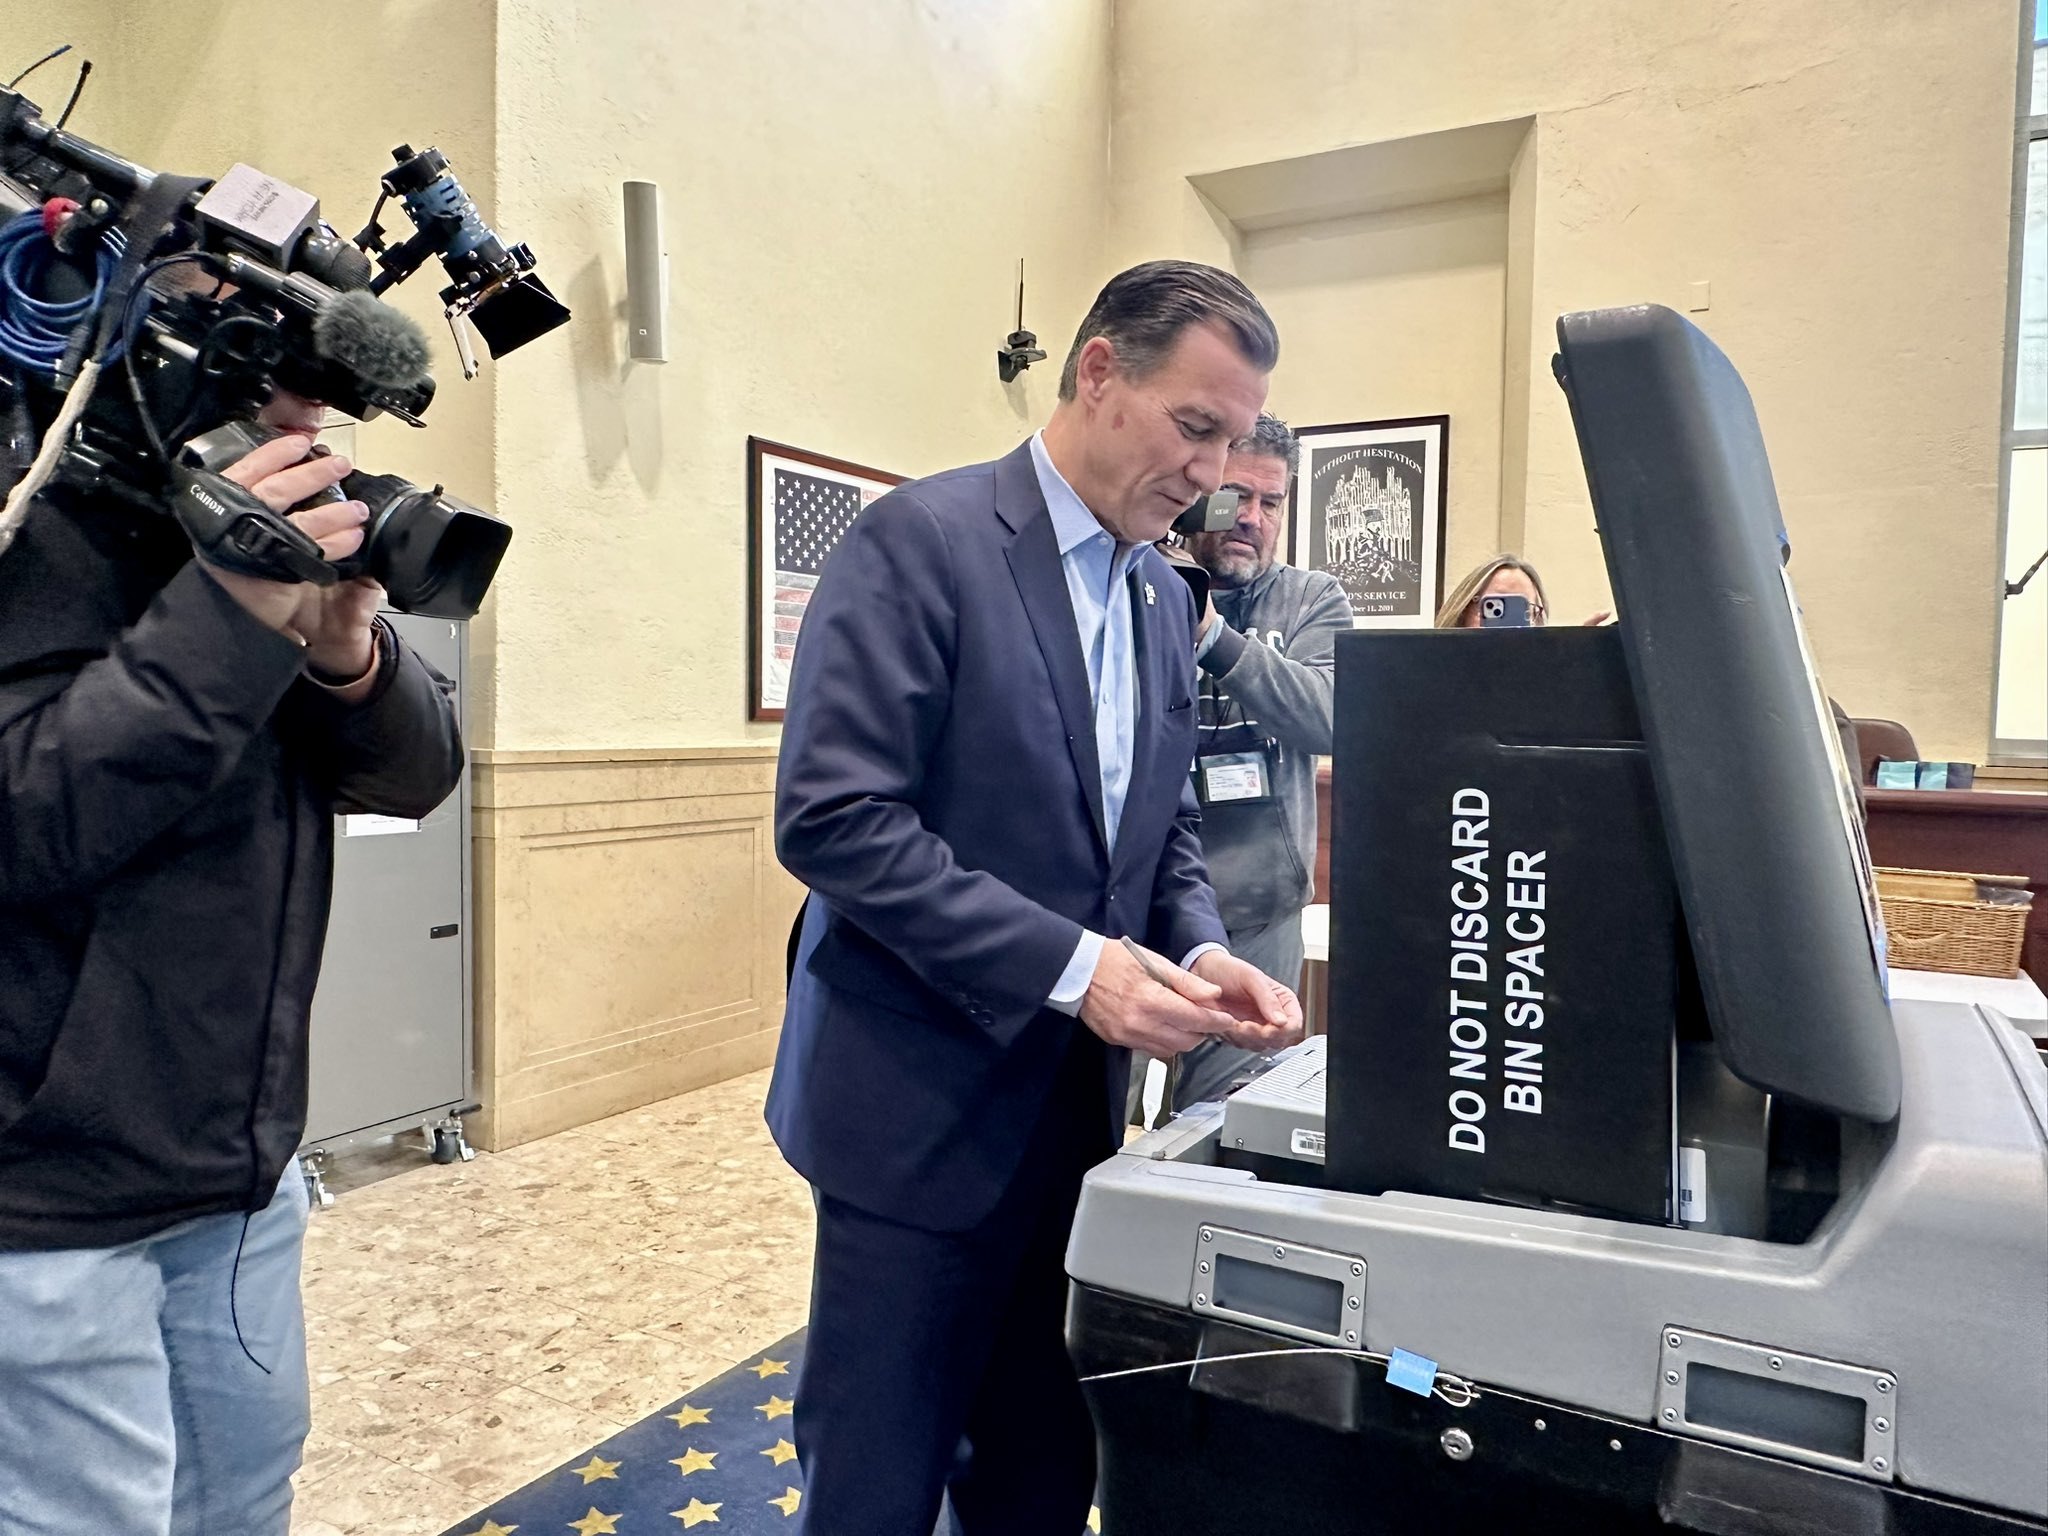 US House candidate Tom Suozzi casts his ballot in New York's Special Election to replace expelled Republican George Santos